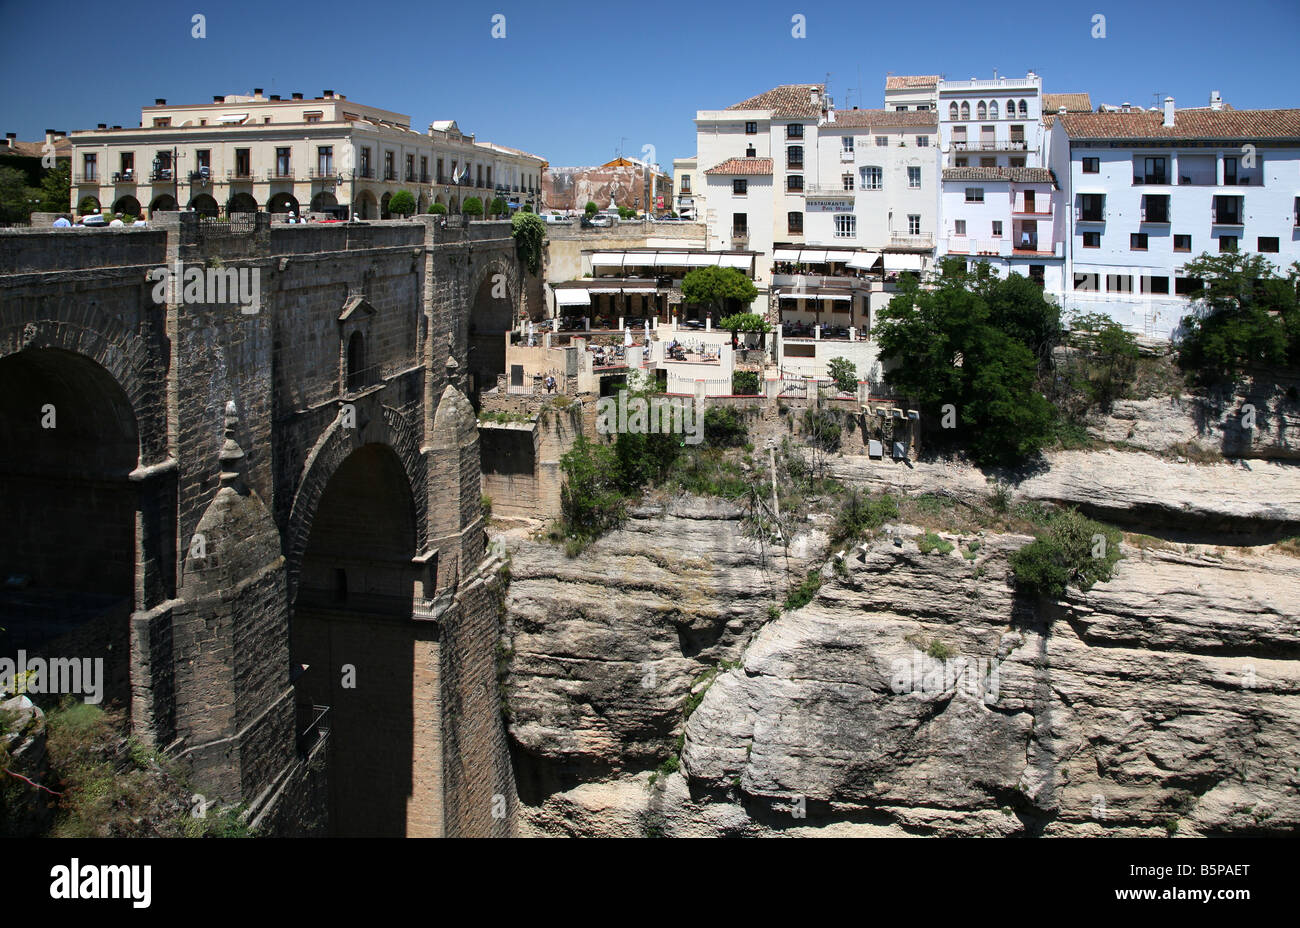 Puente Nuevo, at Ronda, Andalucia, Southern, Spain. The bridge spans the 100 metre gorge cut by the Rio Guadalevín. Stock Photo